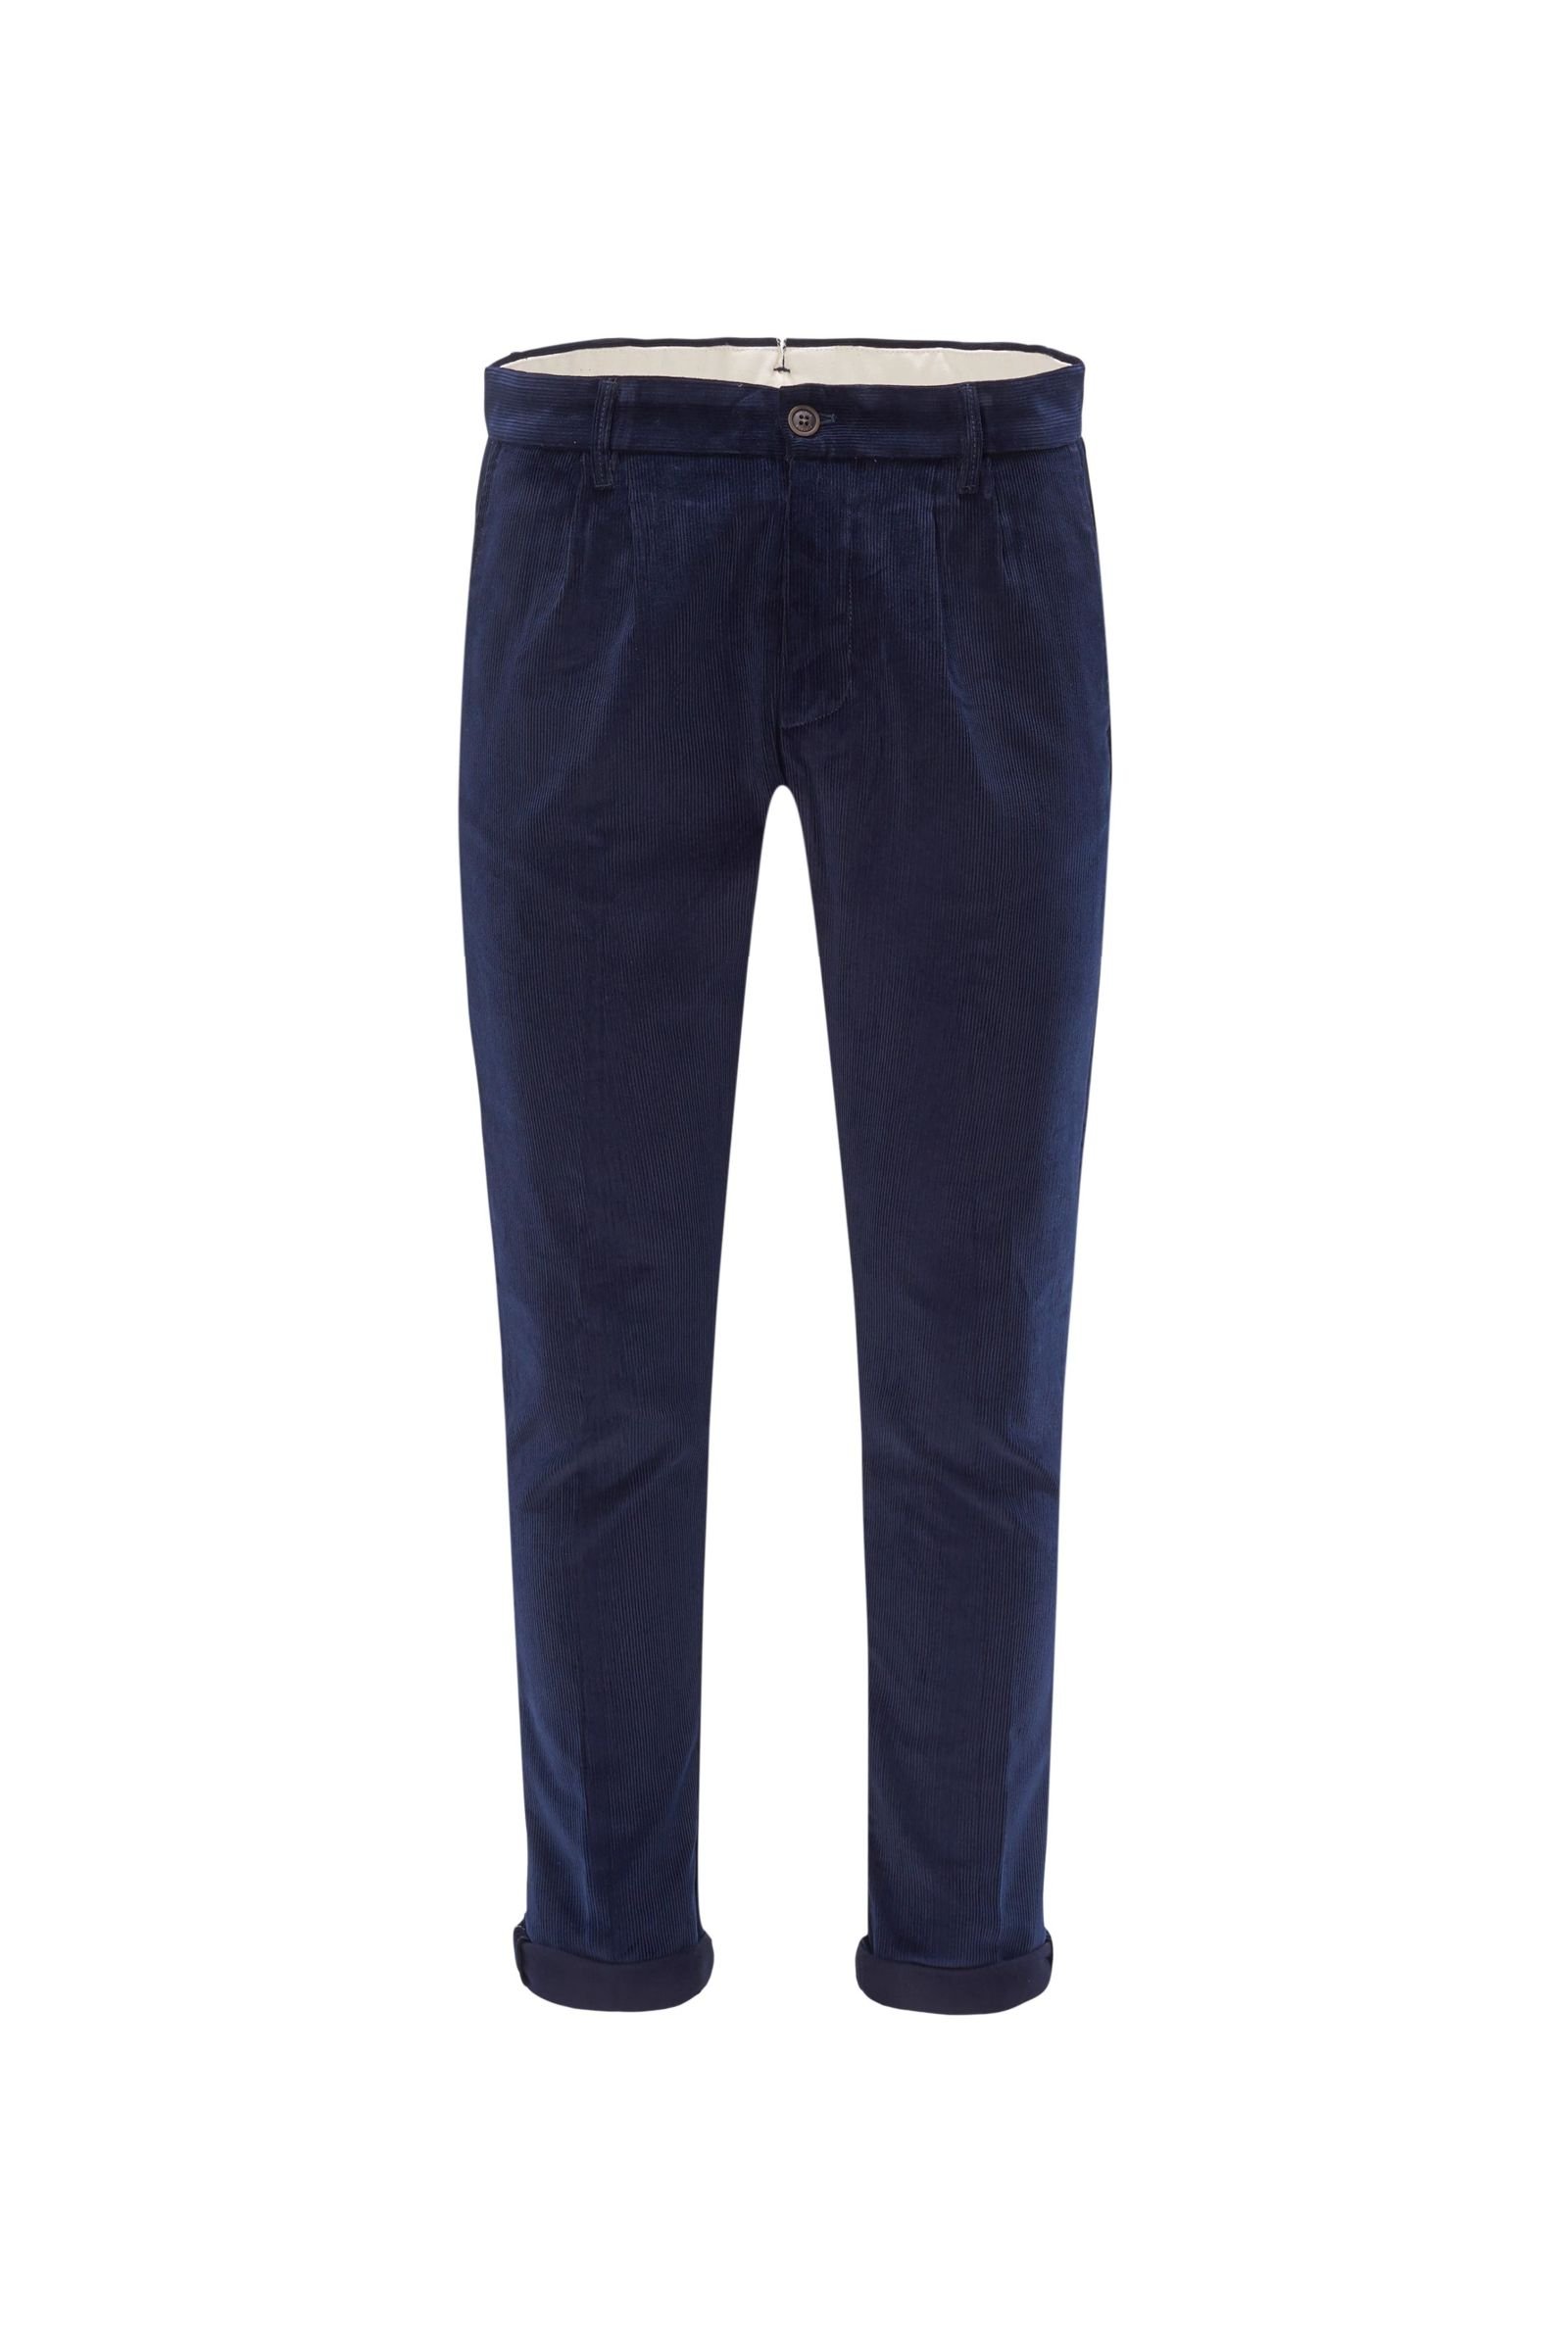 Corduroy trousers 'Pences AMF 17/32-45' navy